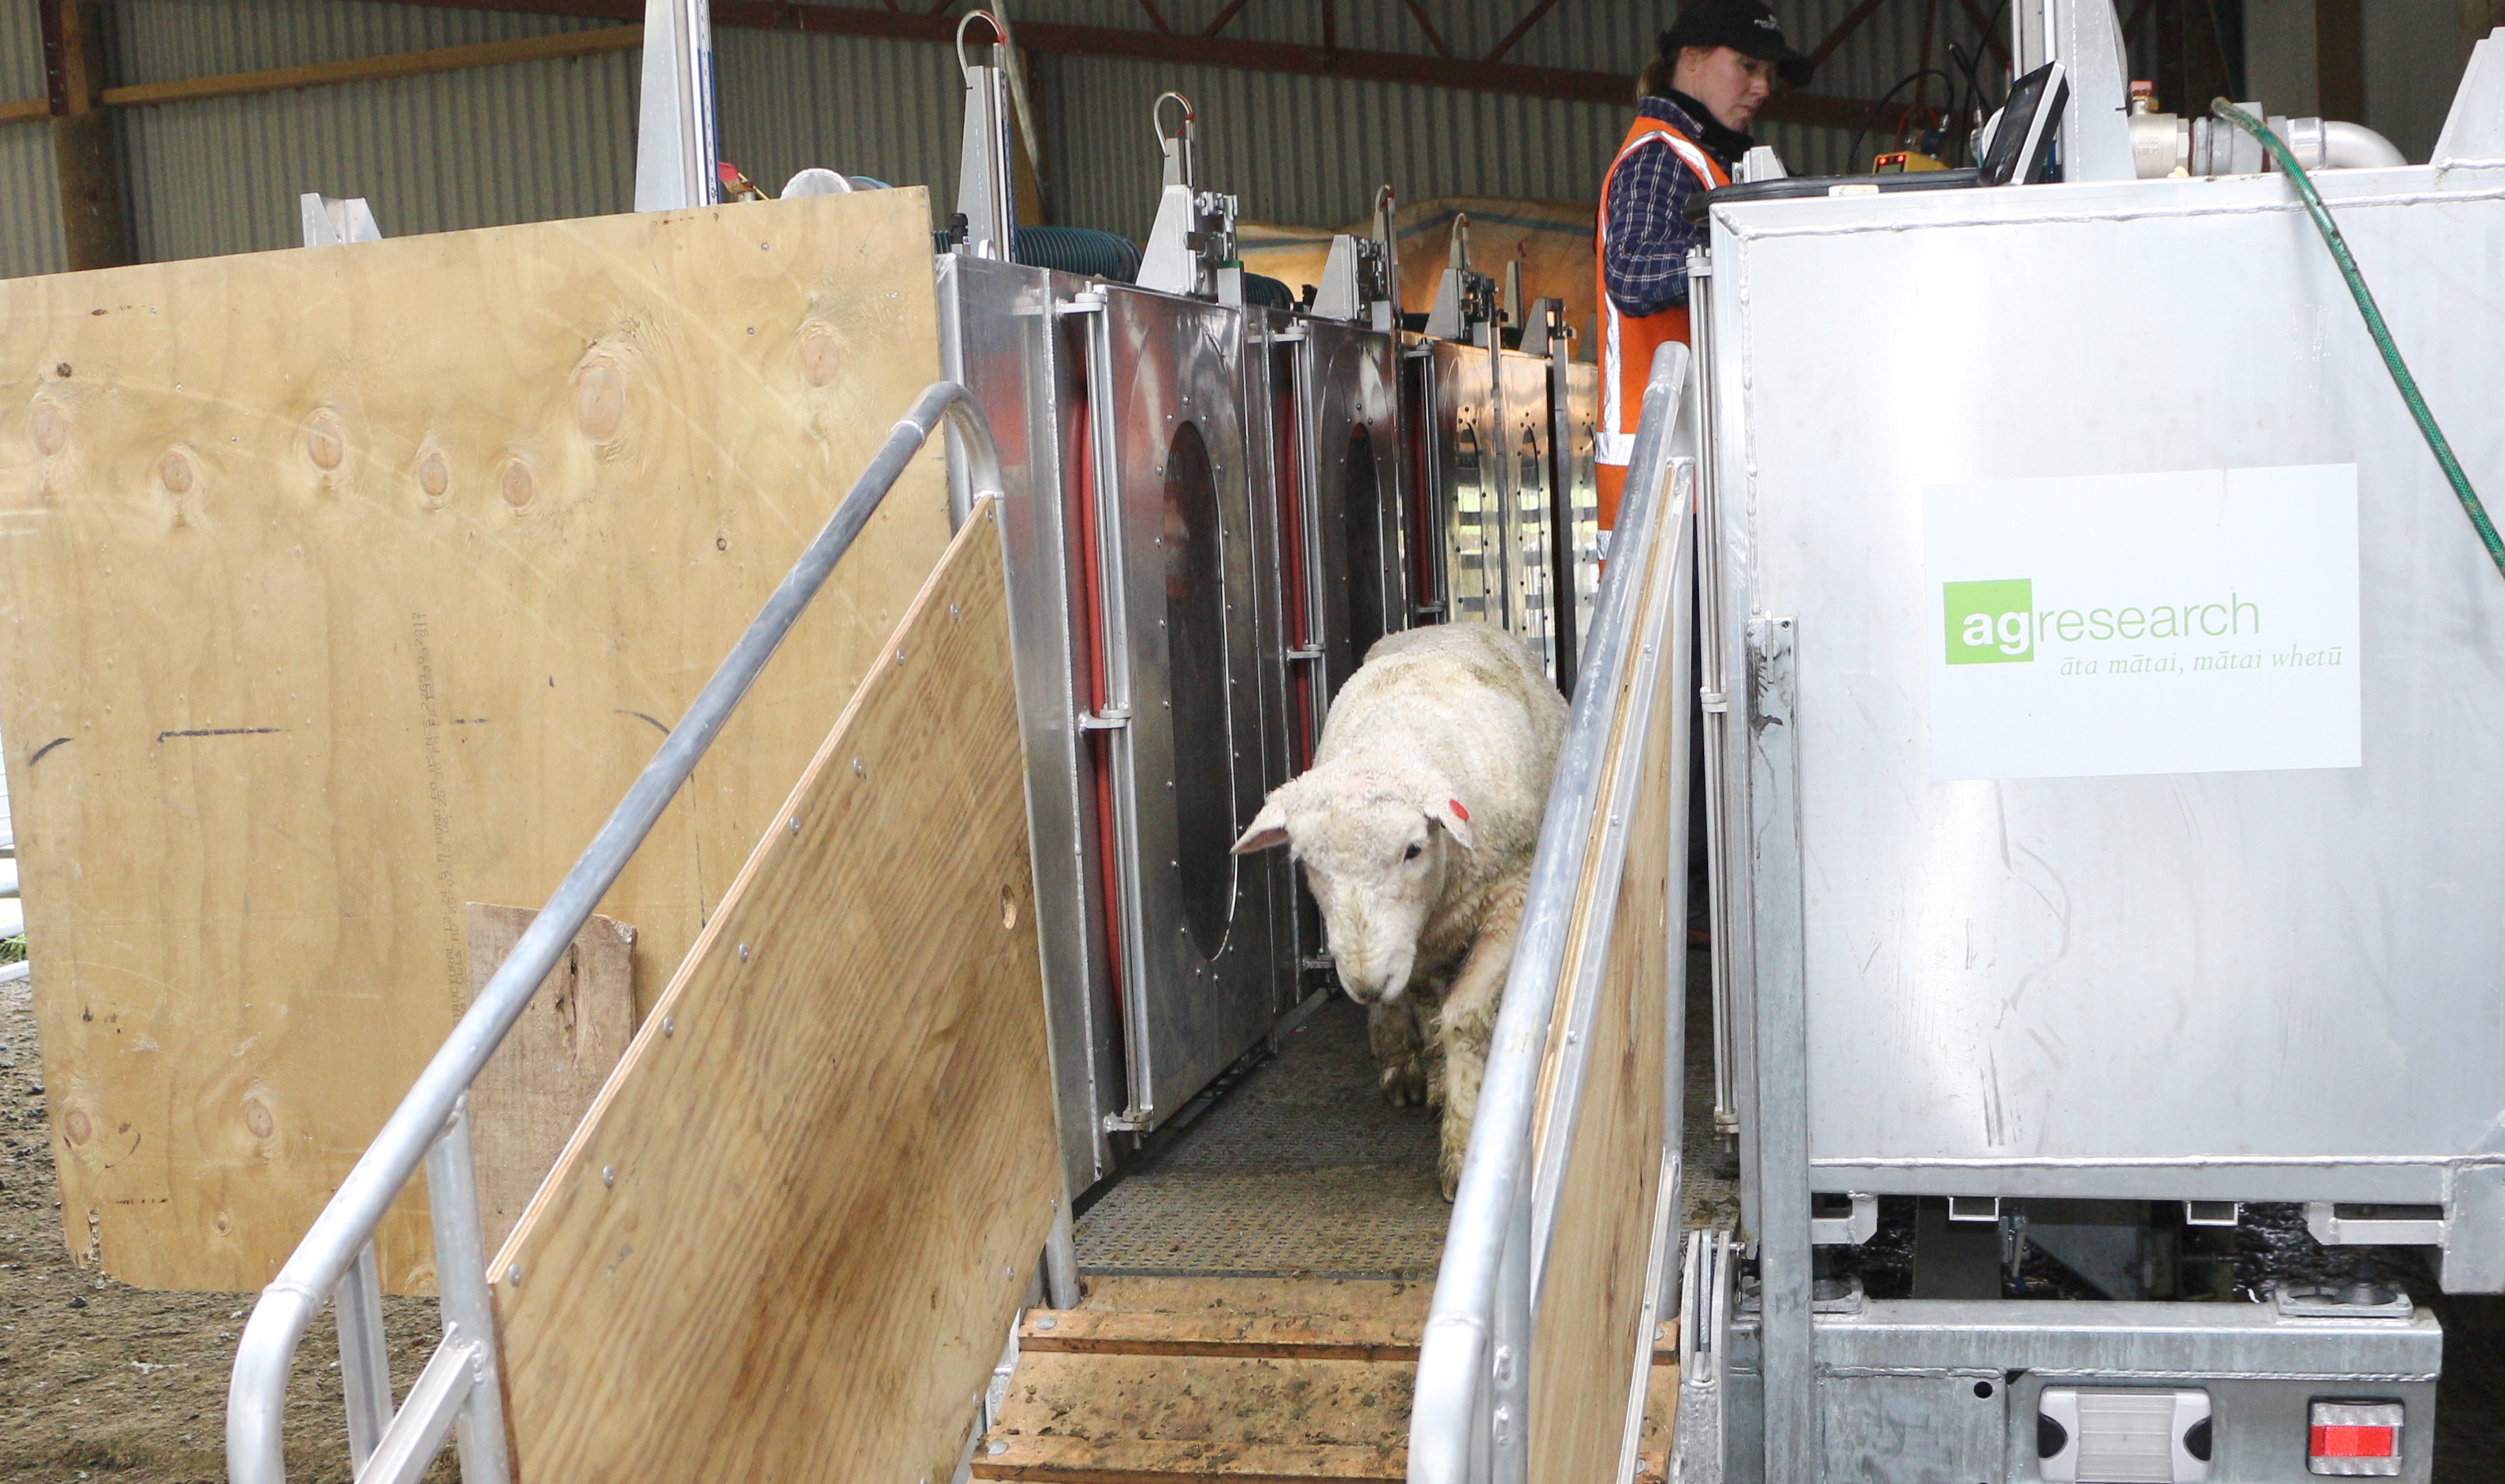 Sheep farmers now able to breed “low methane” sheep